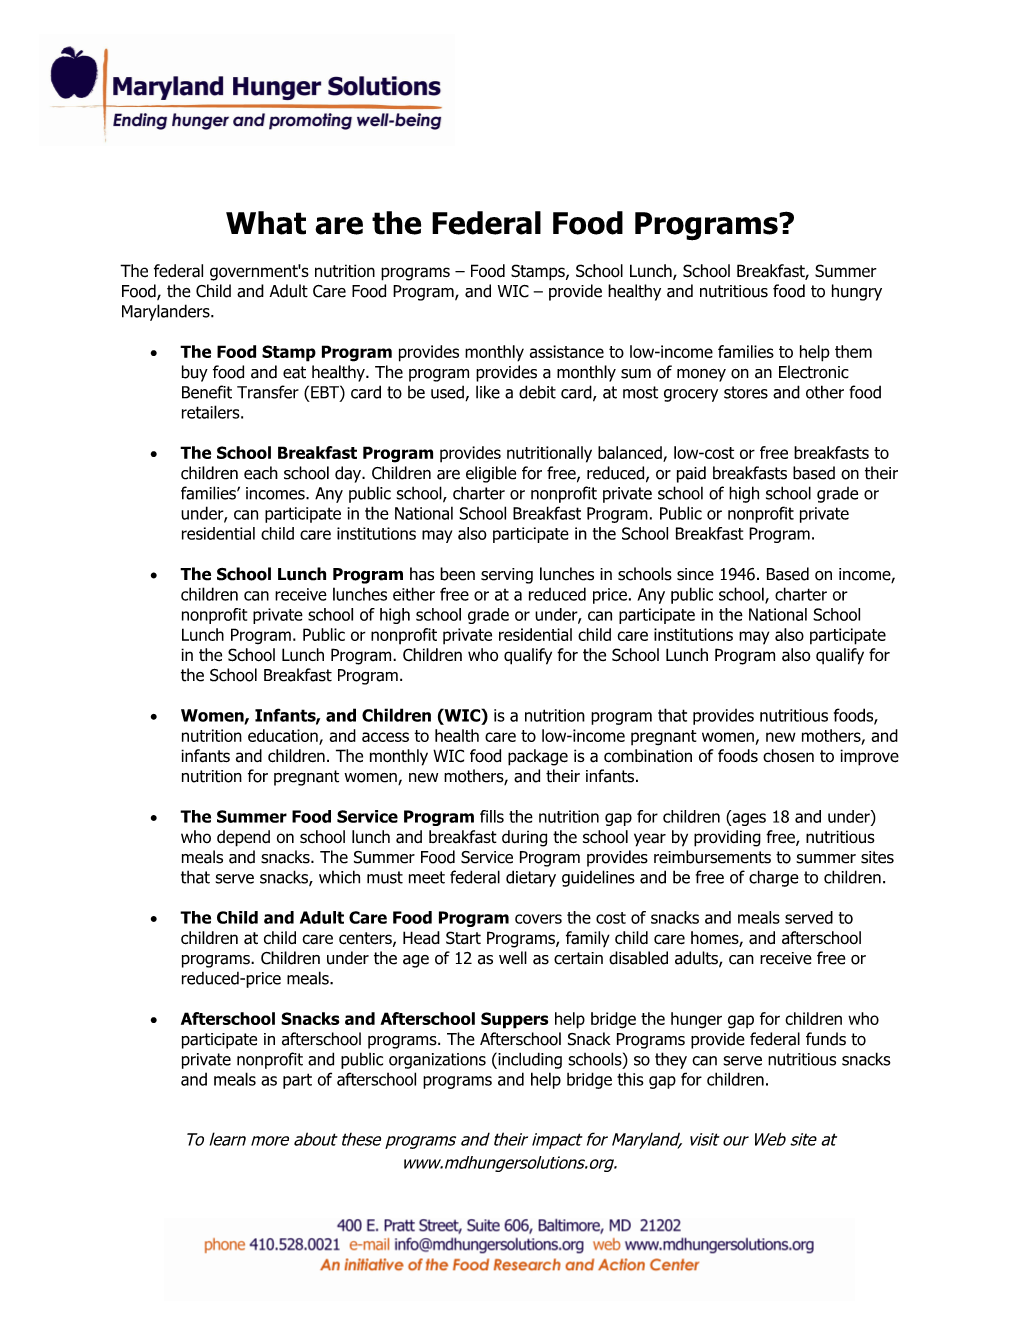 What Are the Federal Food Programs